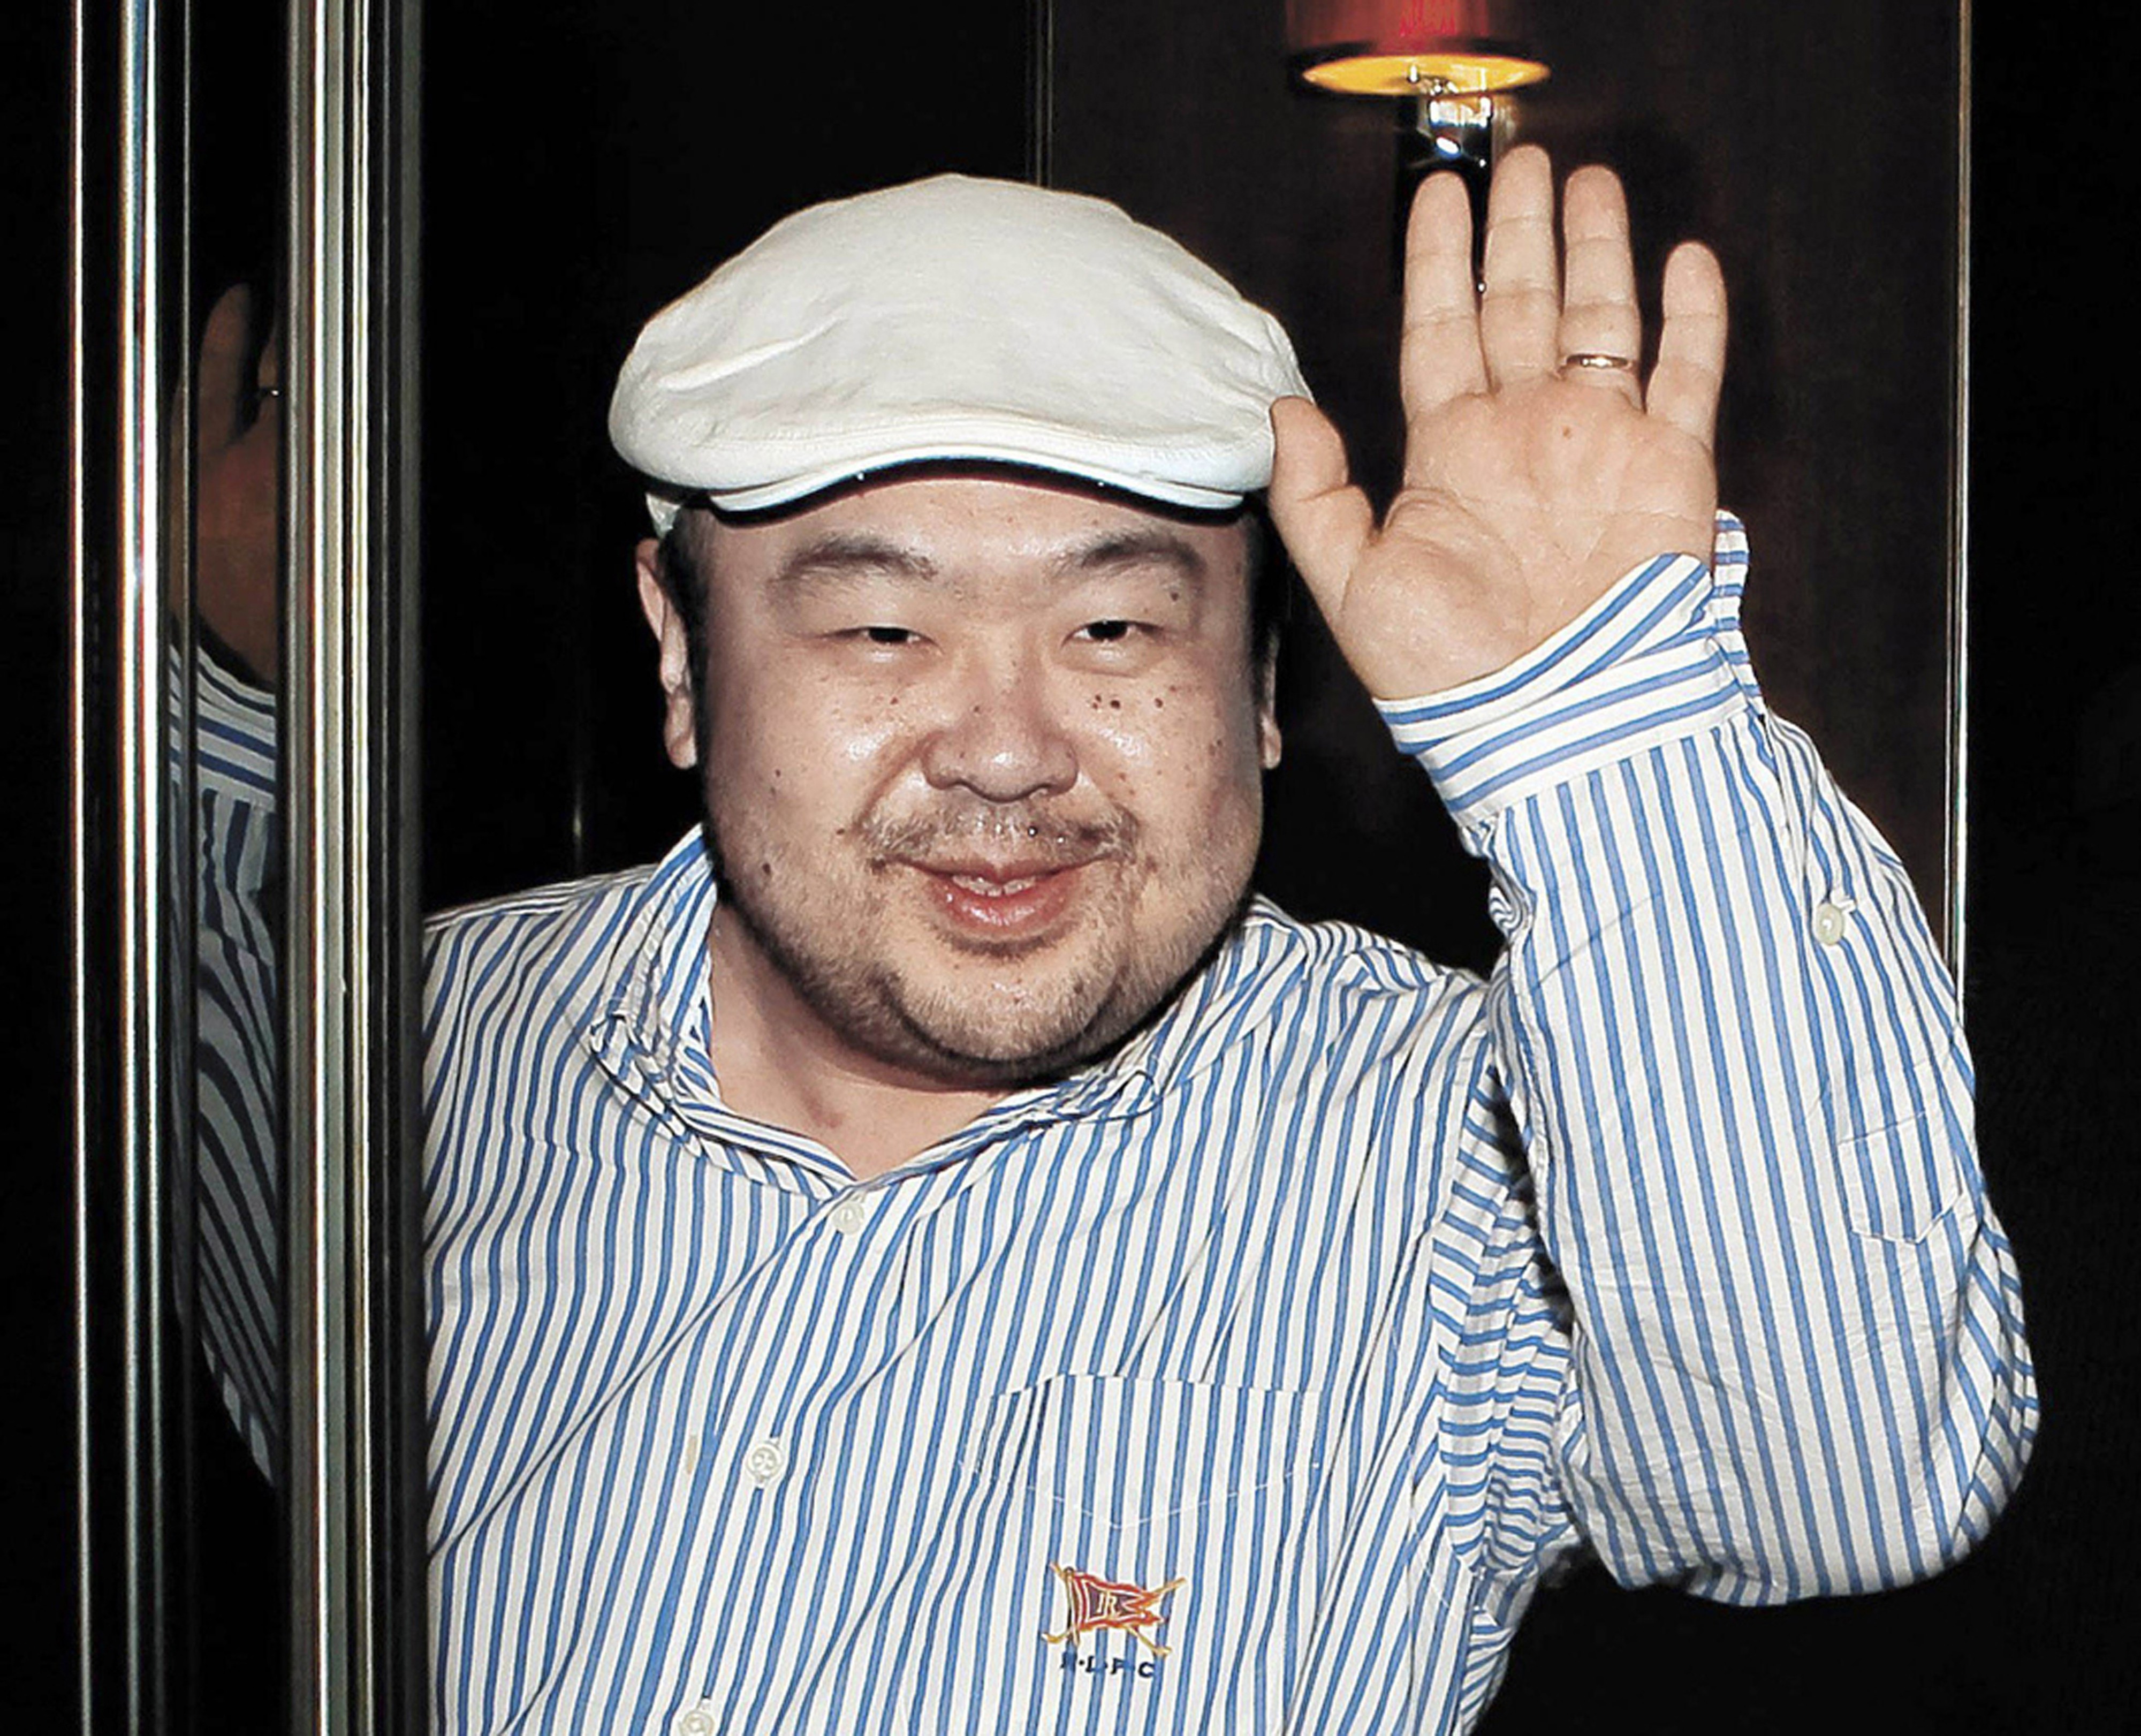 Kim Jong-nam, eldest son of then North Korean leader Kim Jong-il, waves after his first-ever interview with South Korean media in Macau in June 2010. Photo: JoongAng Ilbo via AP